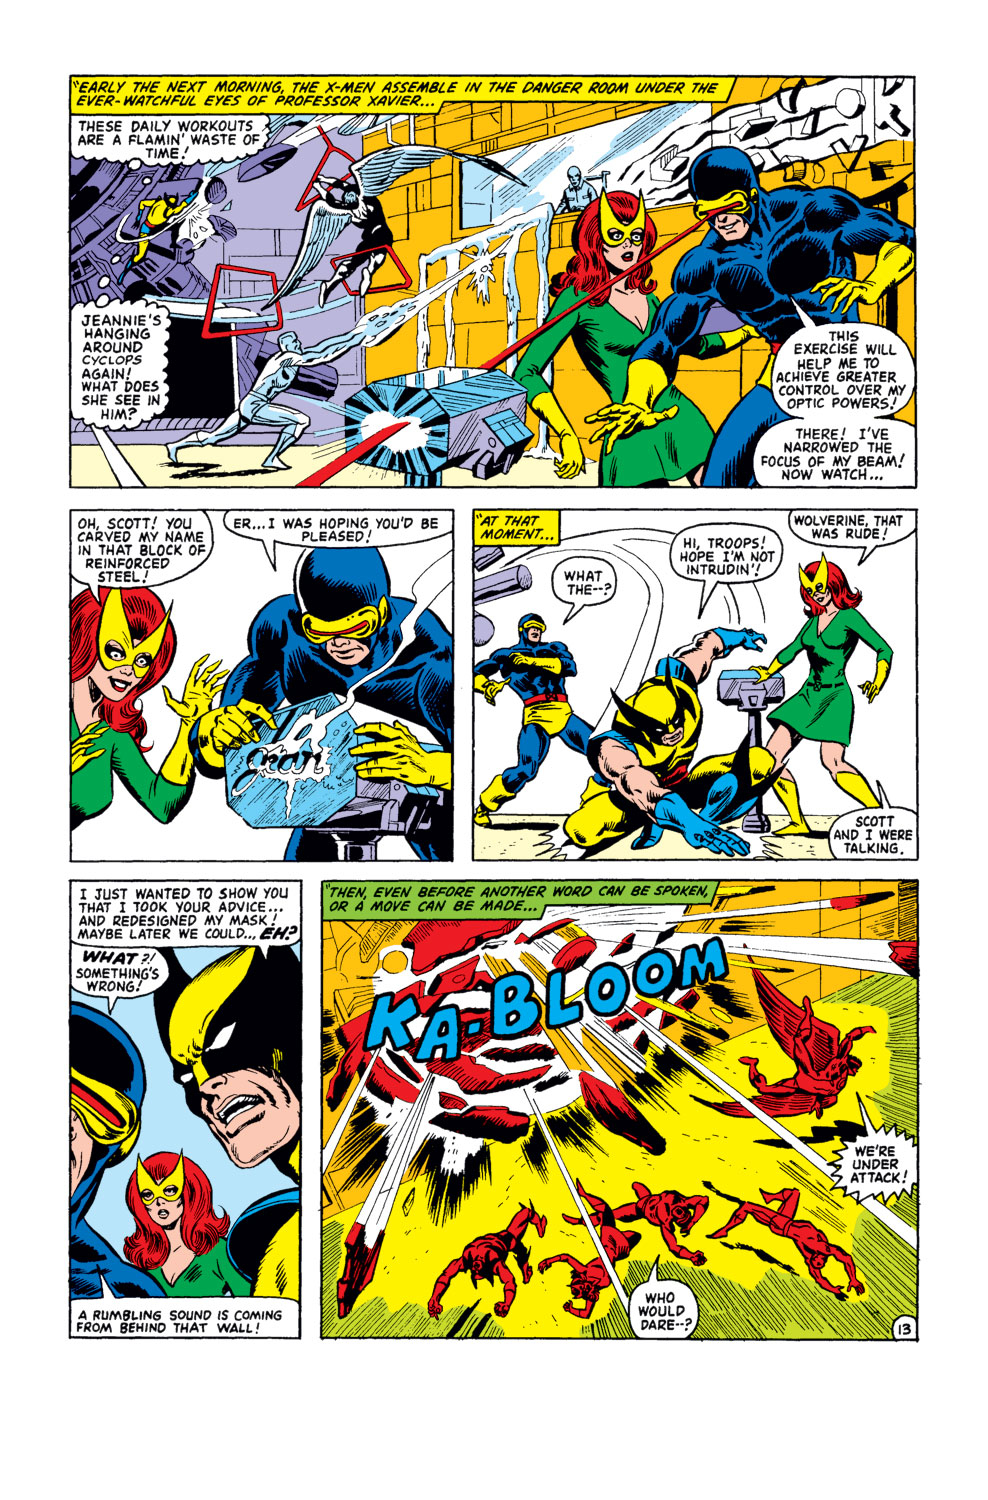 What If? (1977) issue 31 - Wolverine had killed the Hulk - Page 14